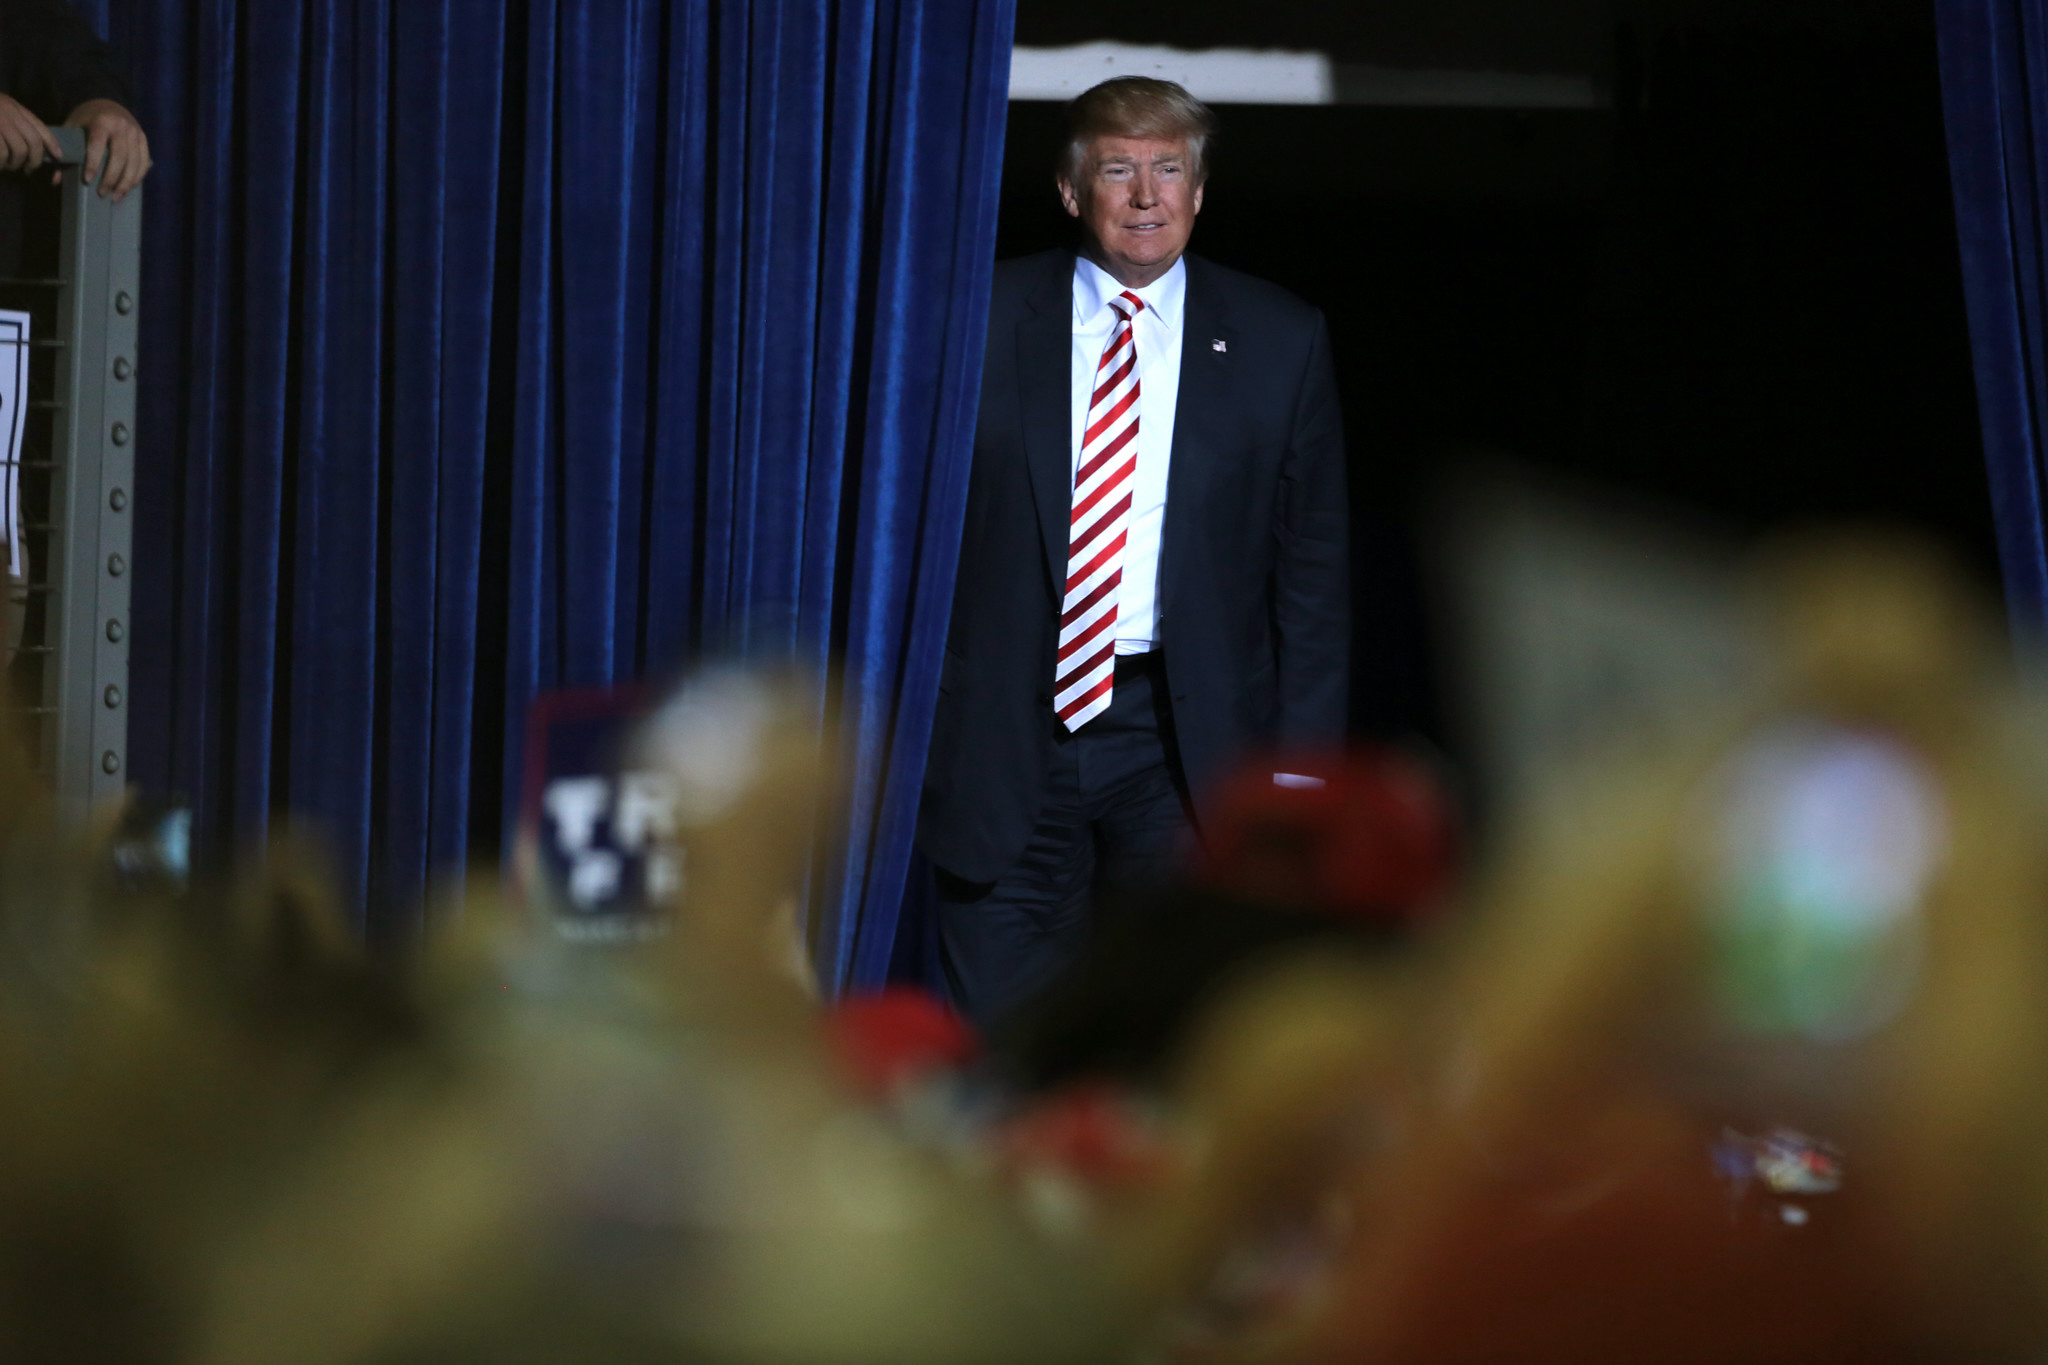 former President Donald Trump walking on stage